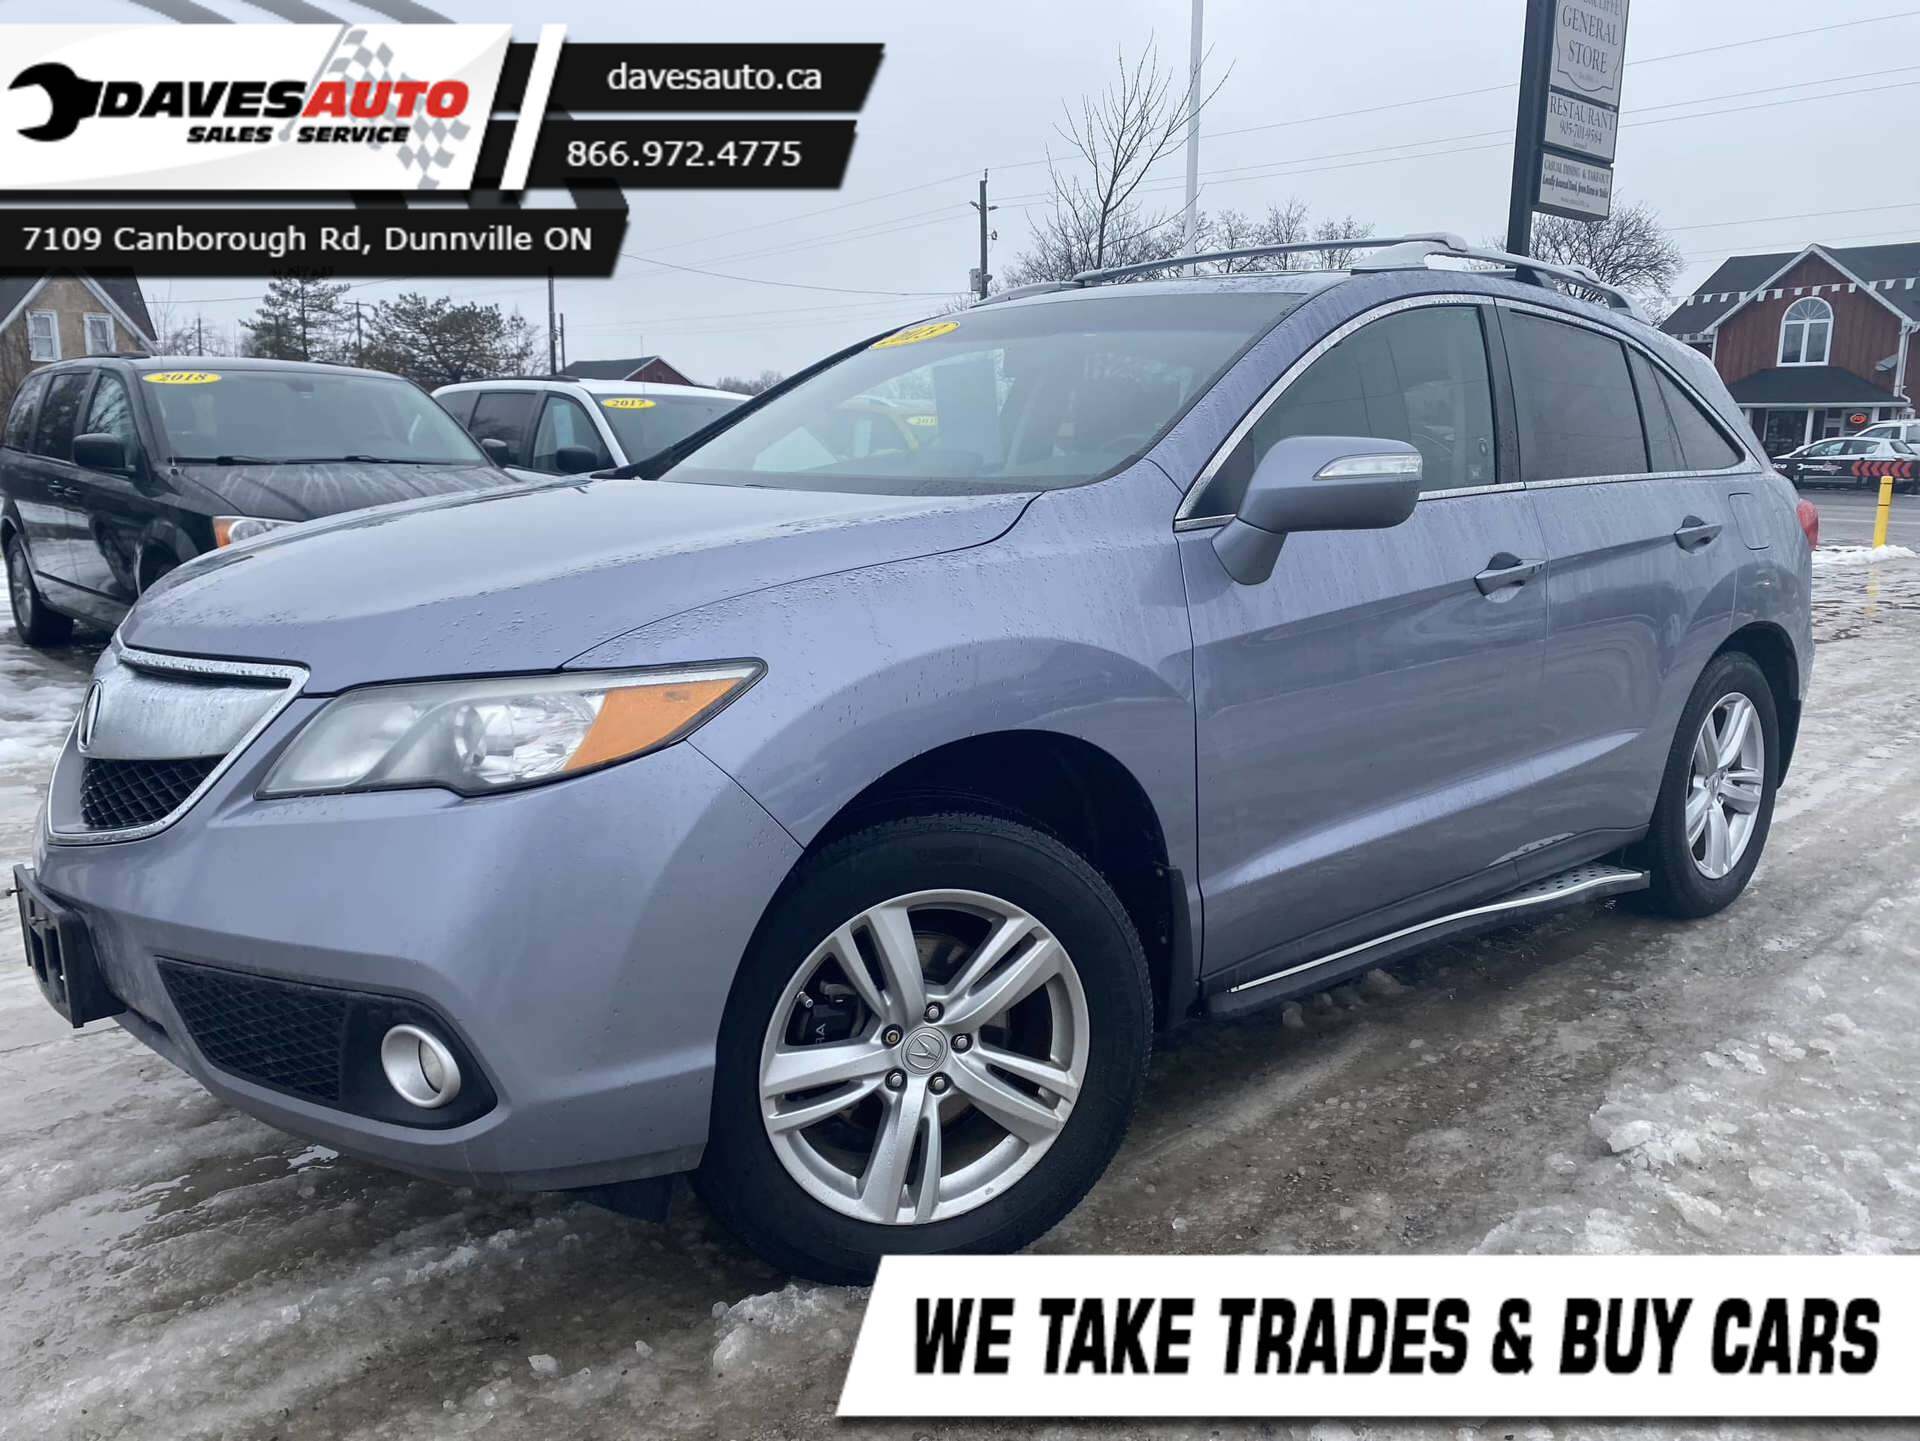 2013 Acura RDX 6-Spd AT AWD w/ Technology Package Acura Serviced!